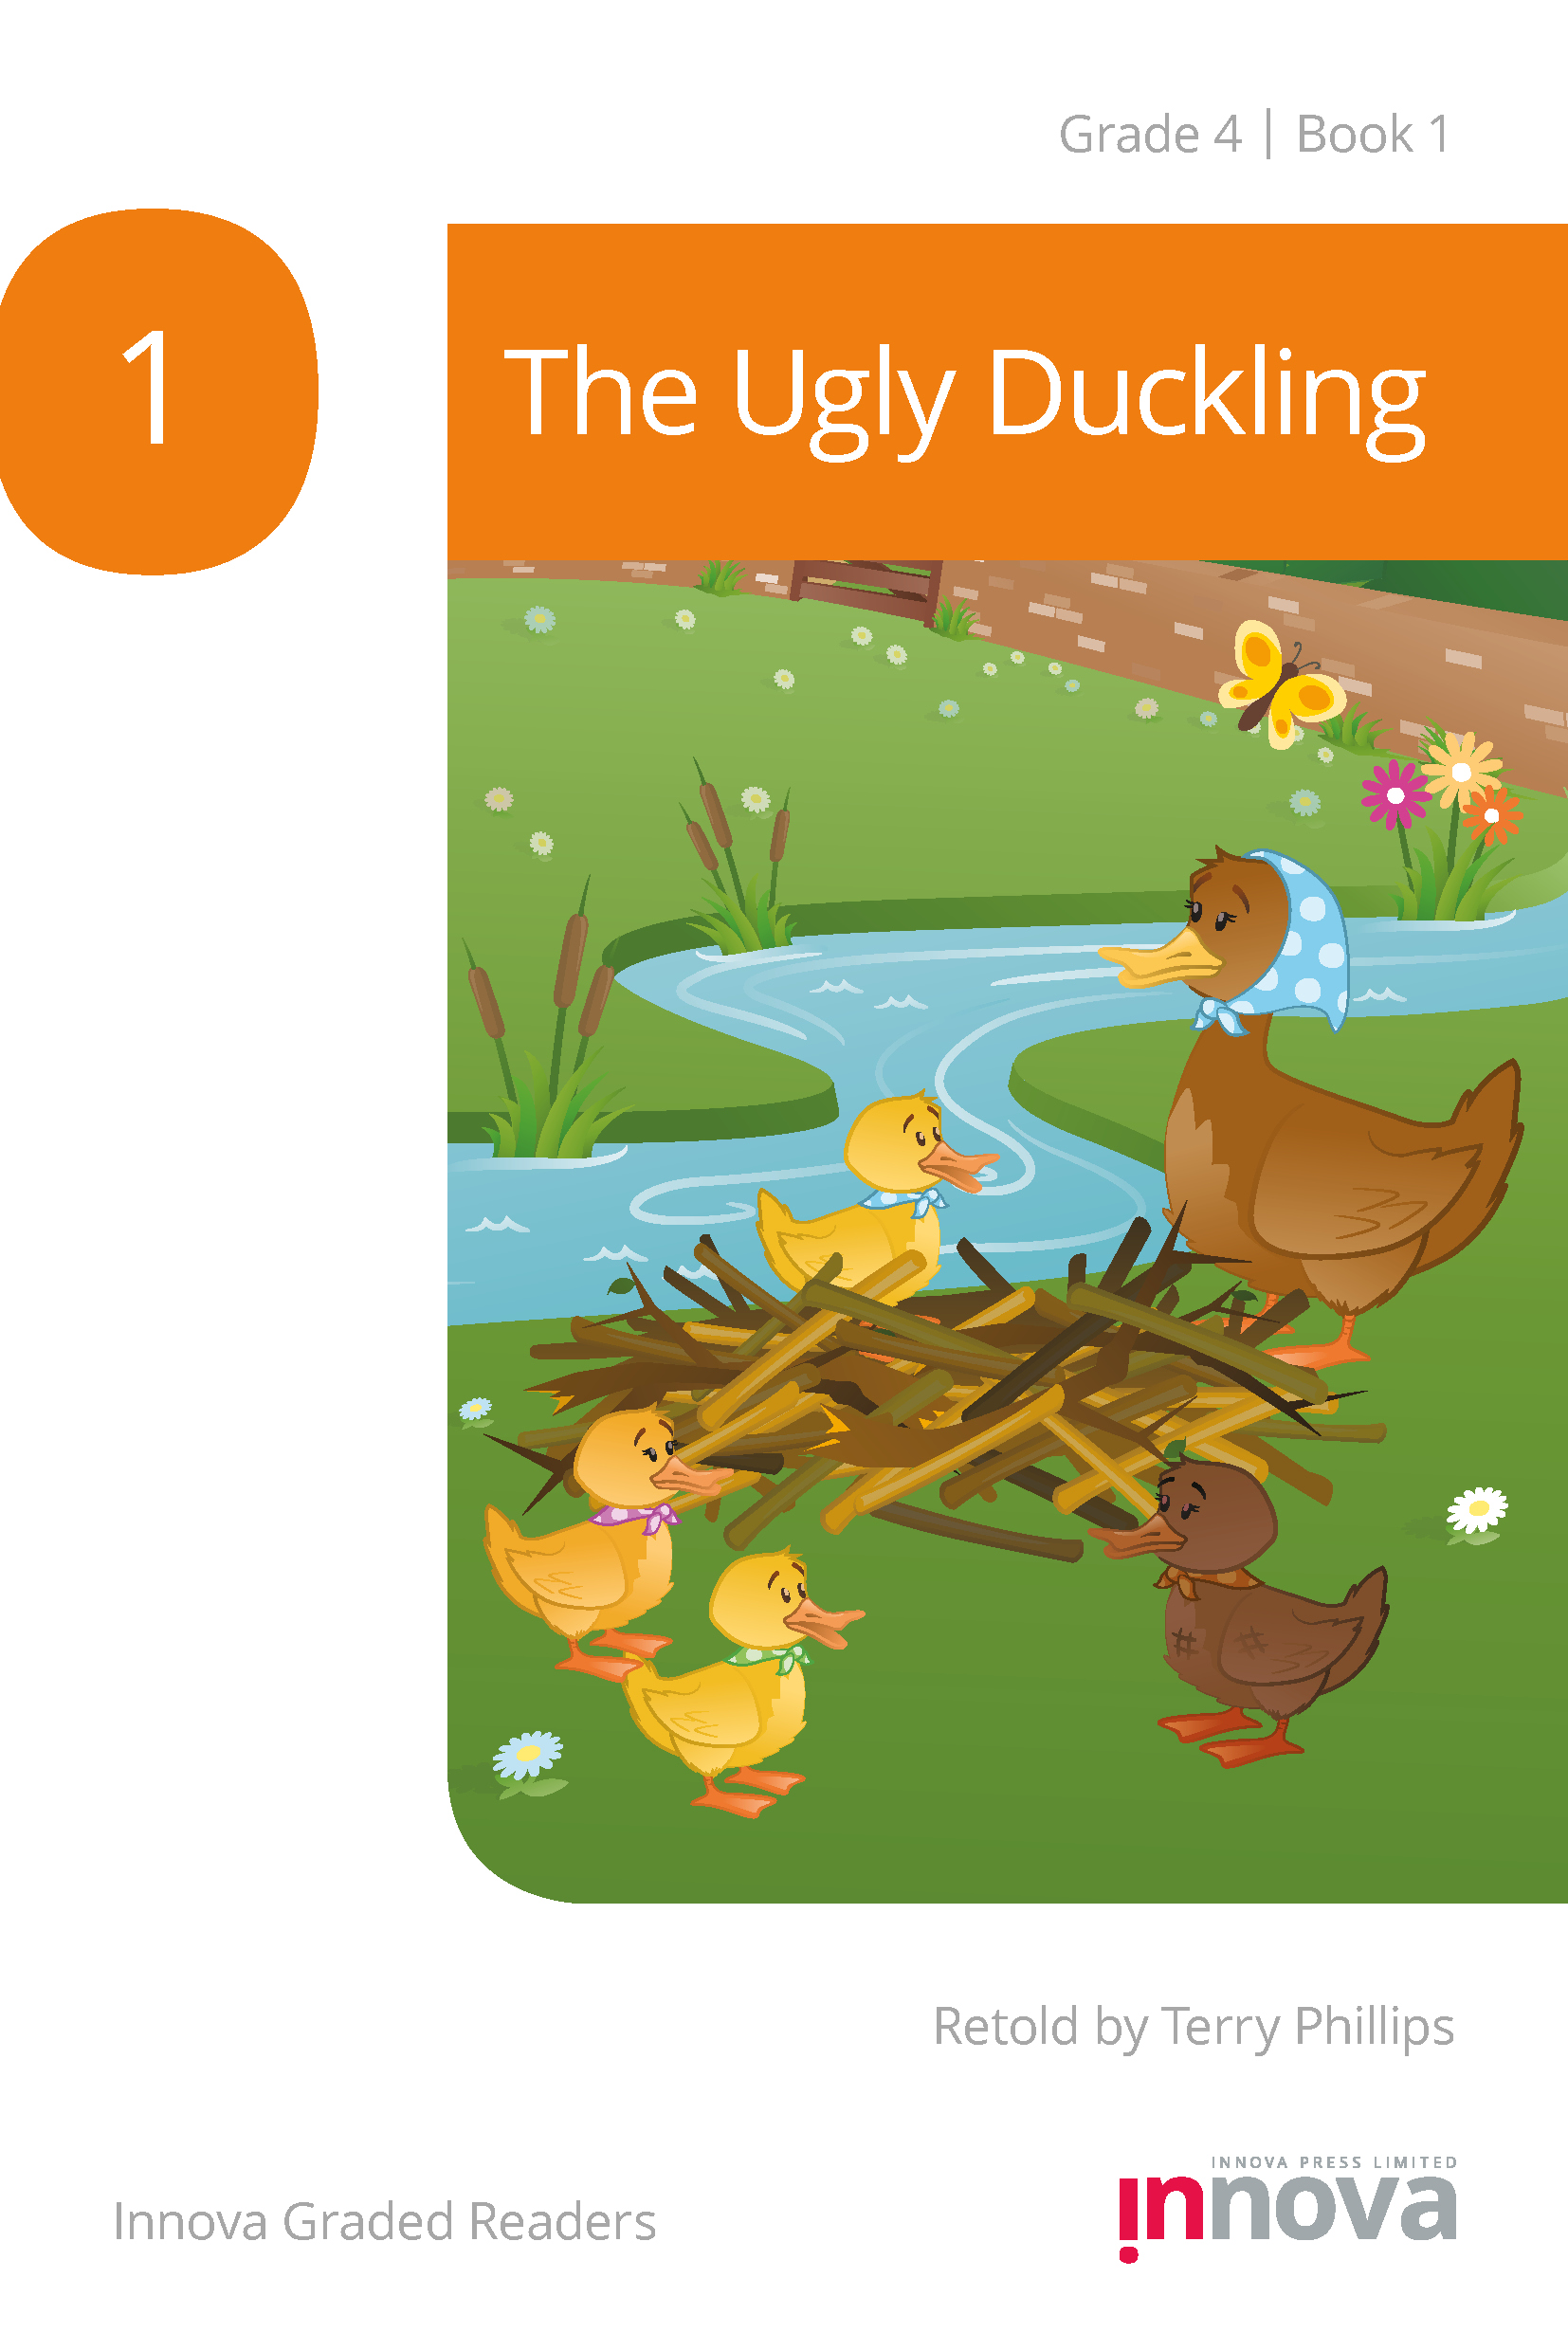 Innova Press The Ugly Duckling cover, a duck stands by a river surrounded by yellow ducklings and a brown signet